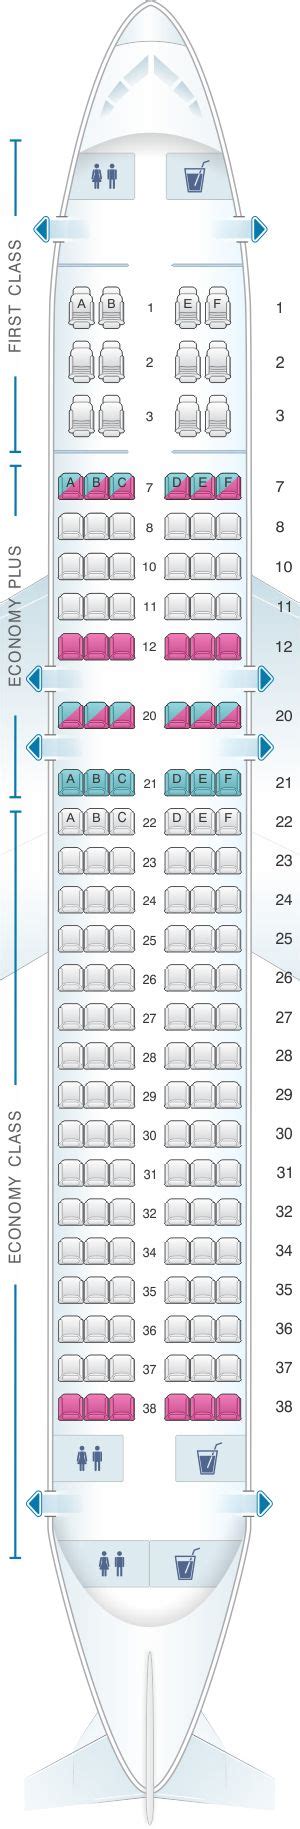 Seat Map United Airlines Airbus A320 Best Airplane Map Delta Airlines